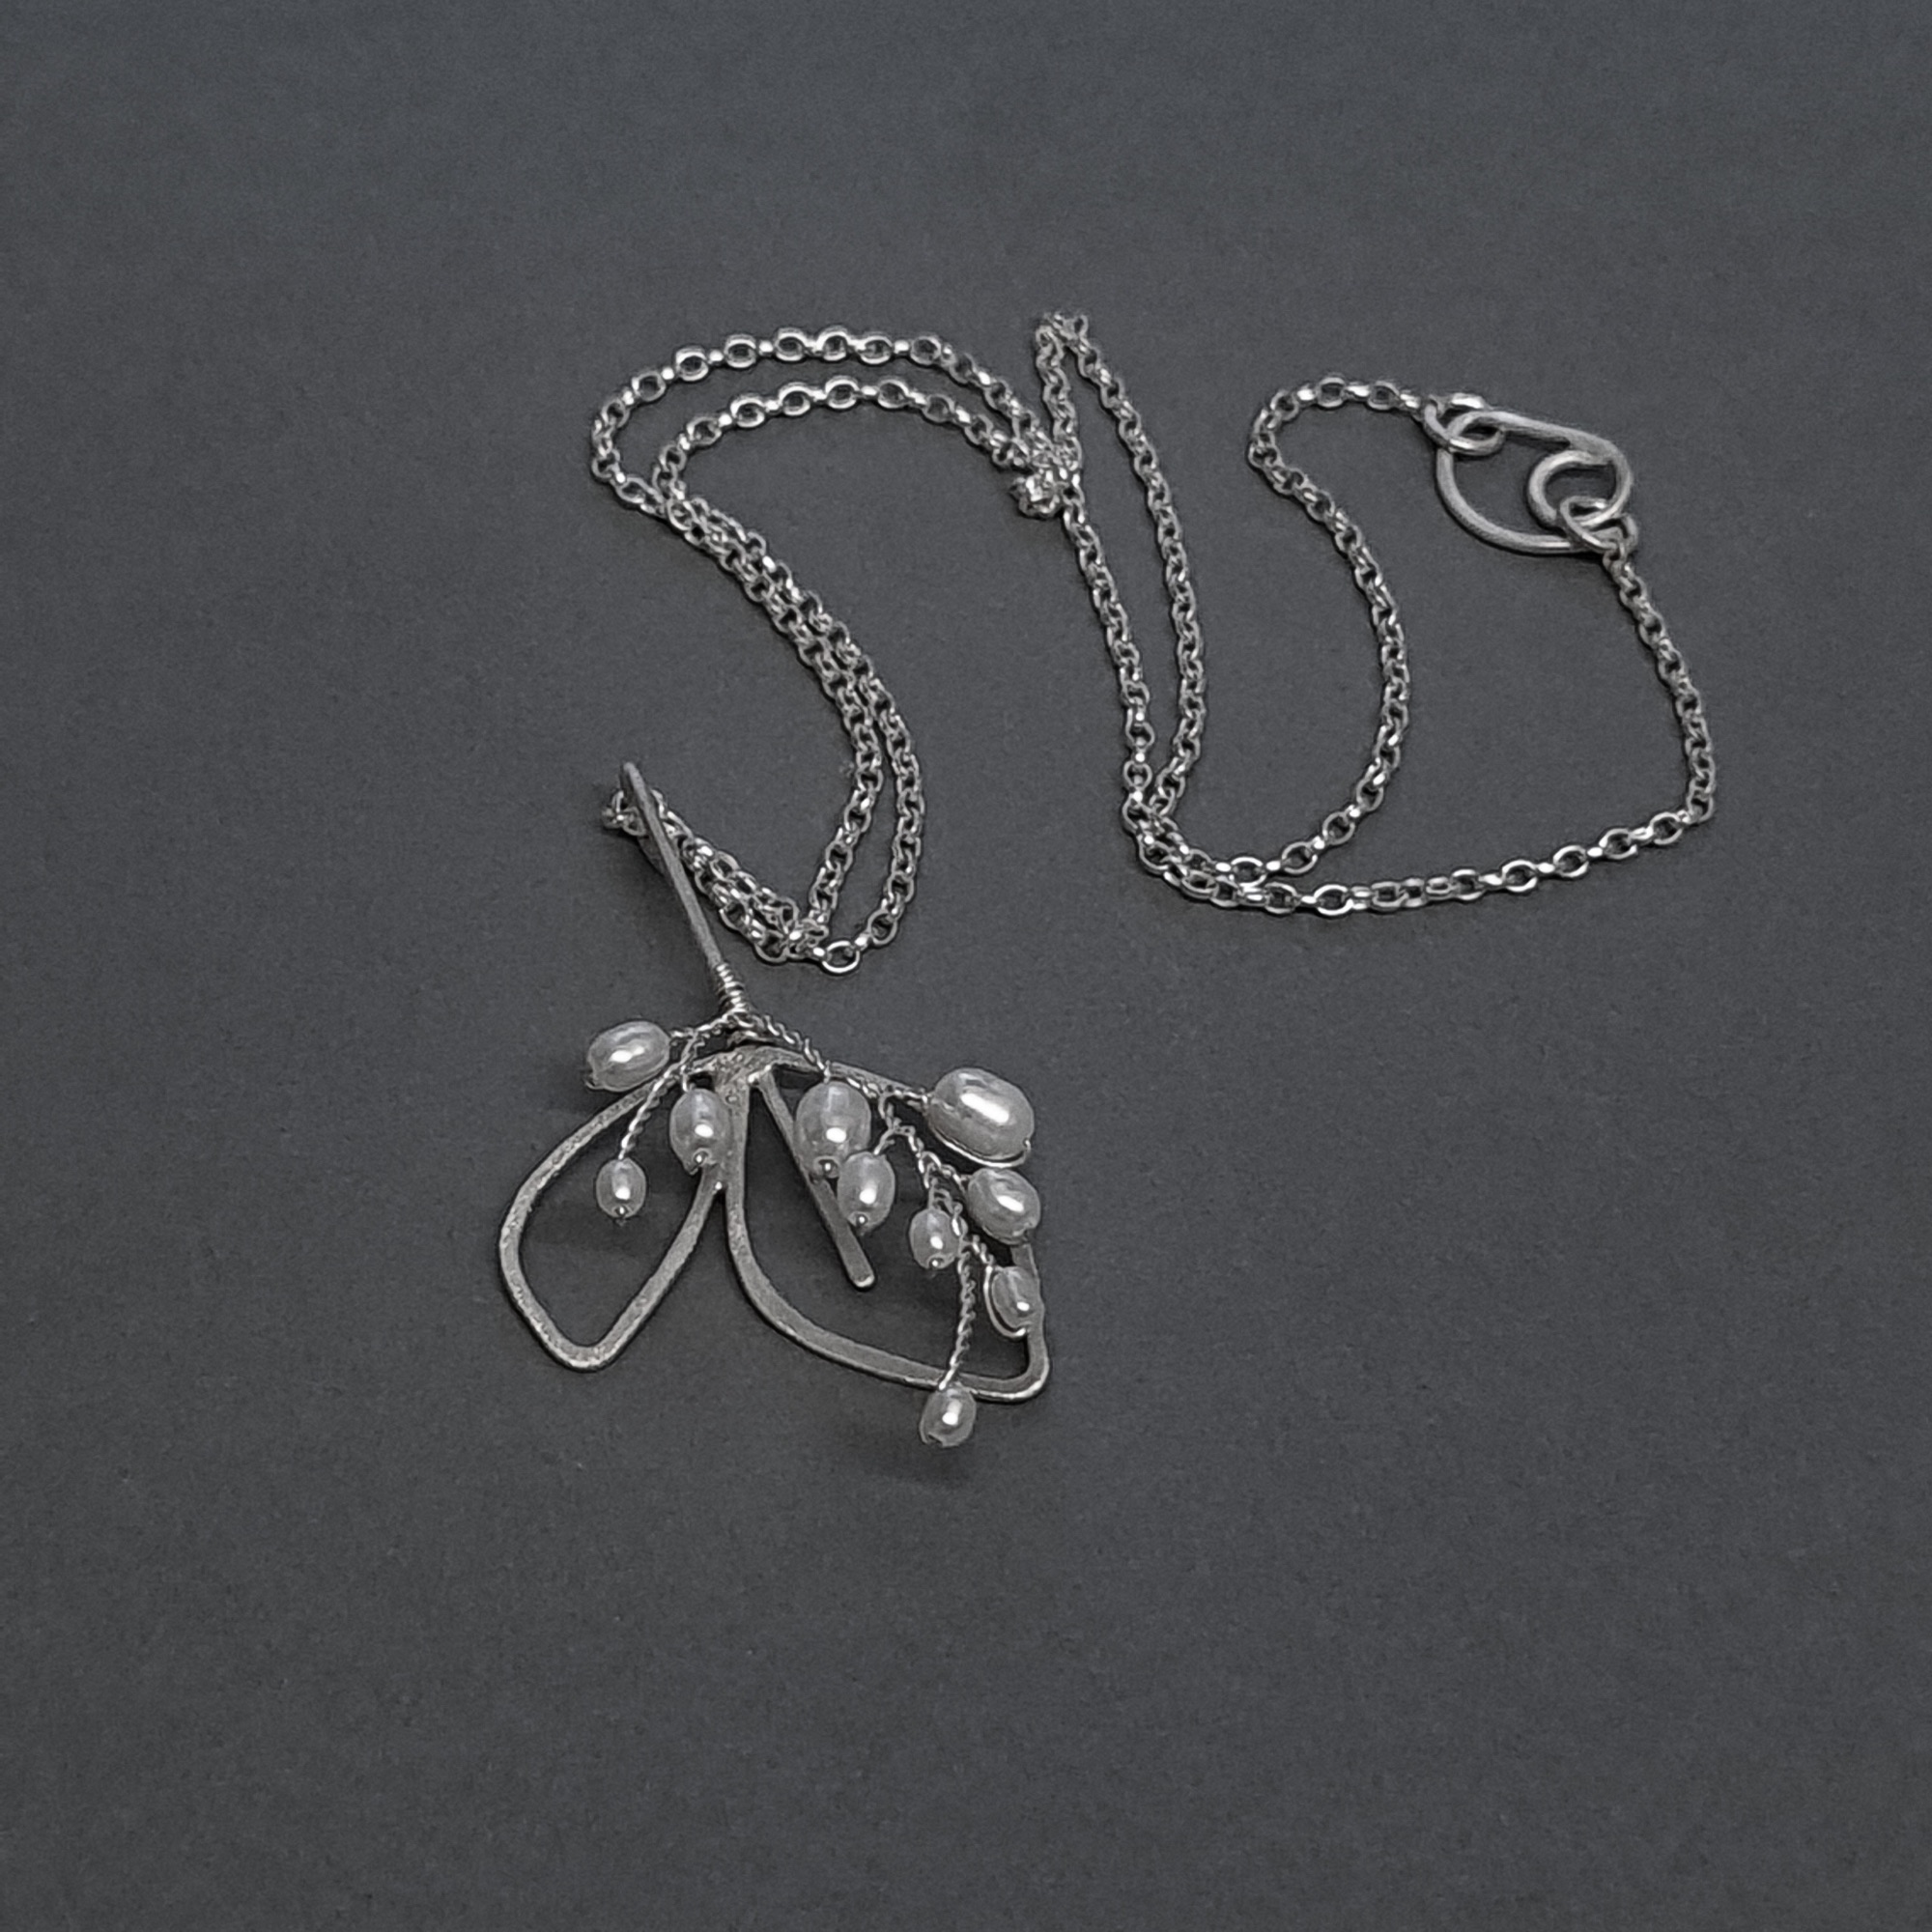 Recycled sterling silver outline leaf pendant necklace with freshwater pearls 